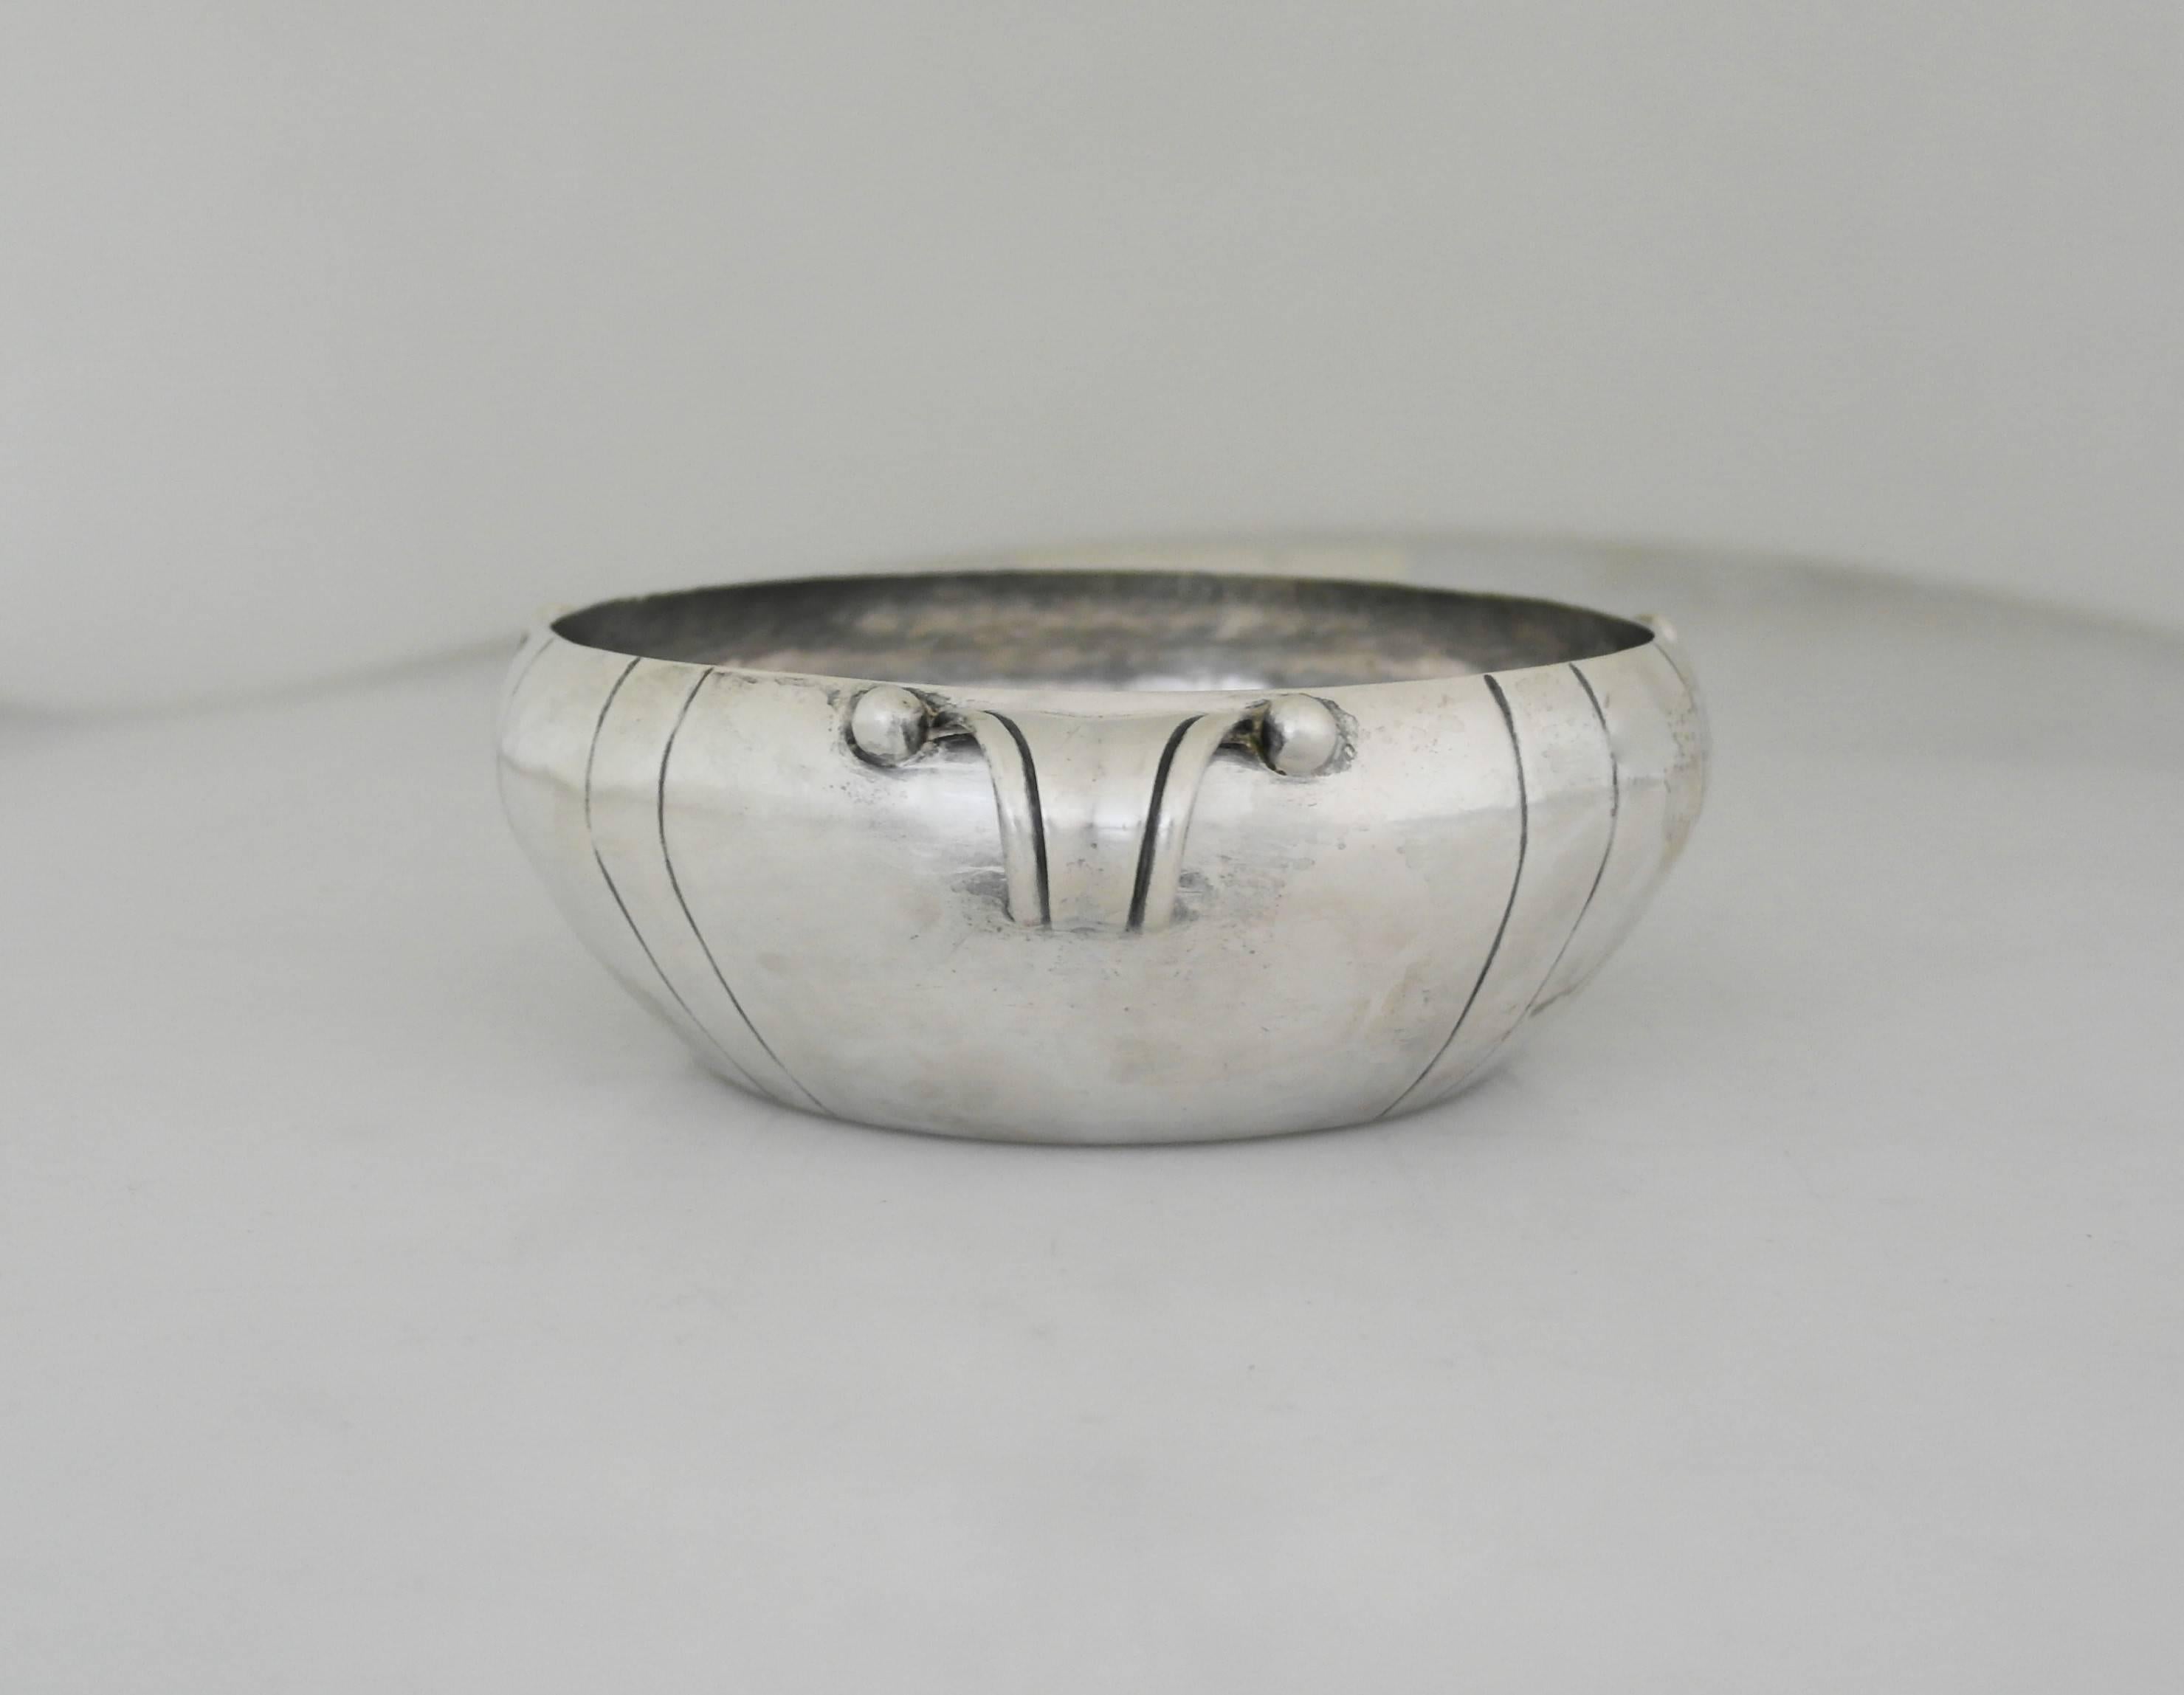 William Spratling Hand-Wrought Sterling Silver Bowl 1